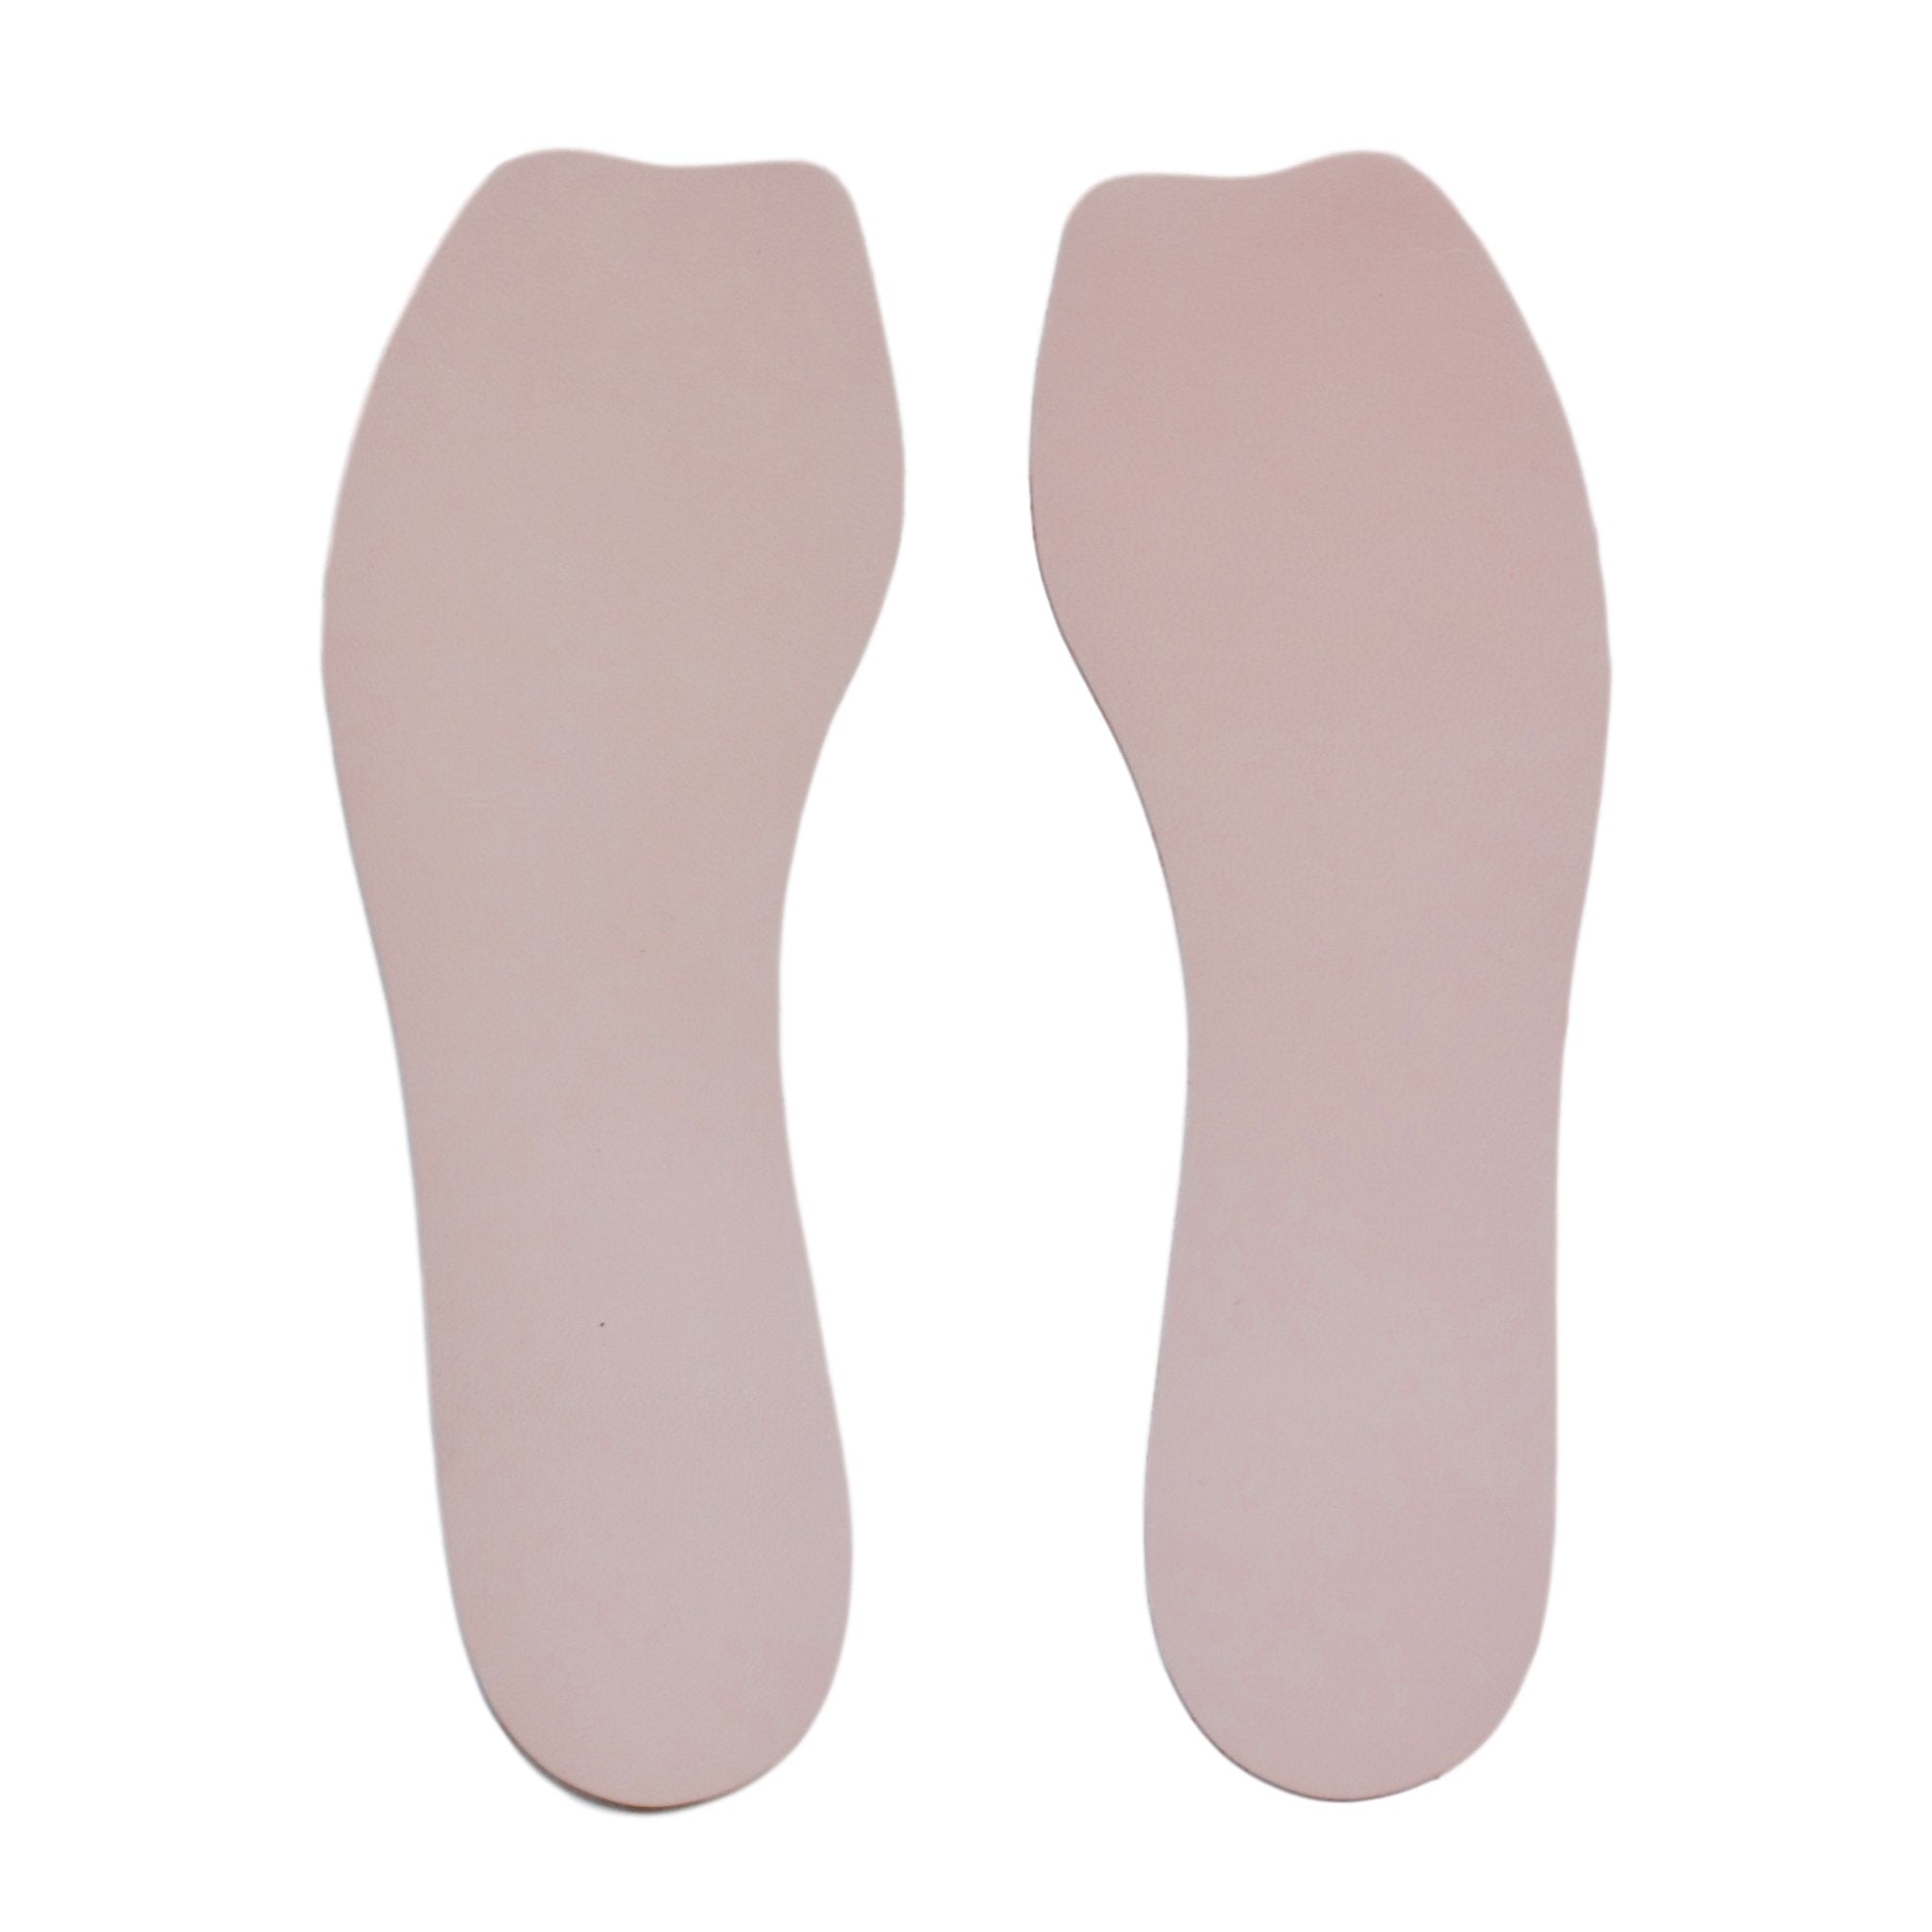 Dr. Scholl's Soft Cushioning Shoe Insoles for High Heels (Women's 6-10)  Inserts to Help Prevent Pain - Walmart.com